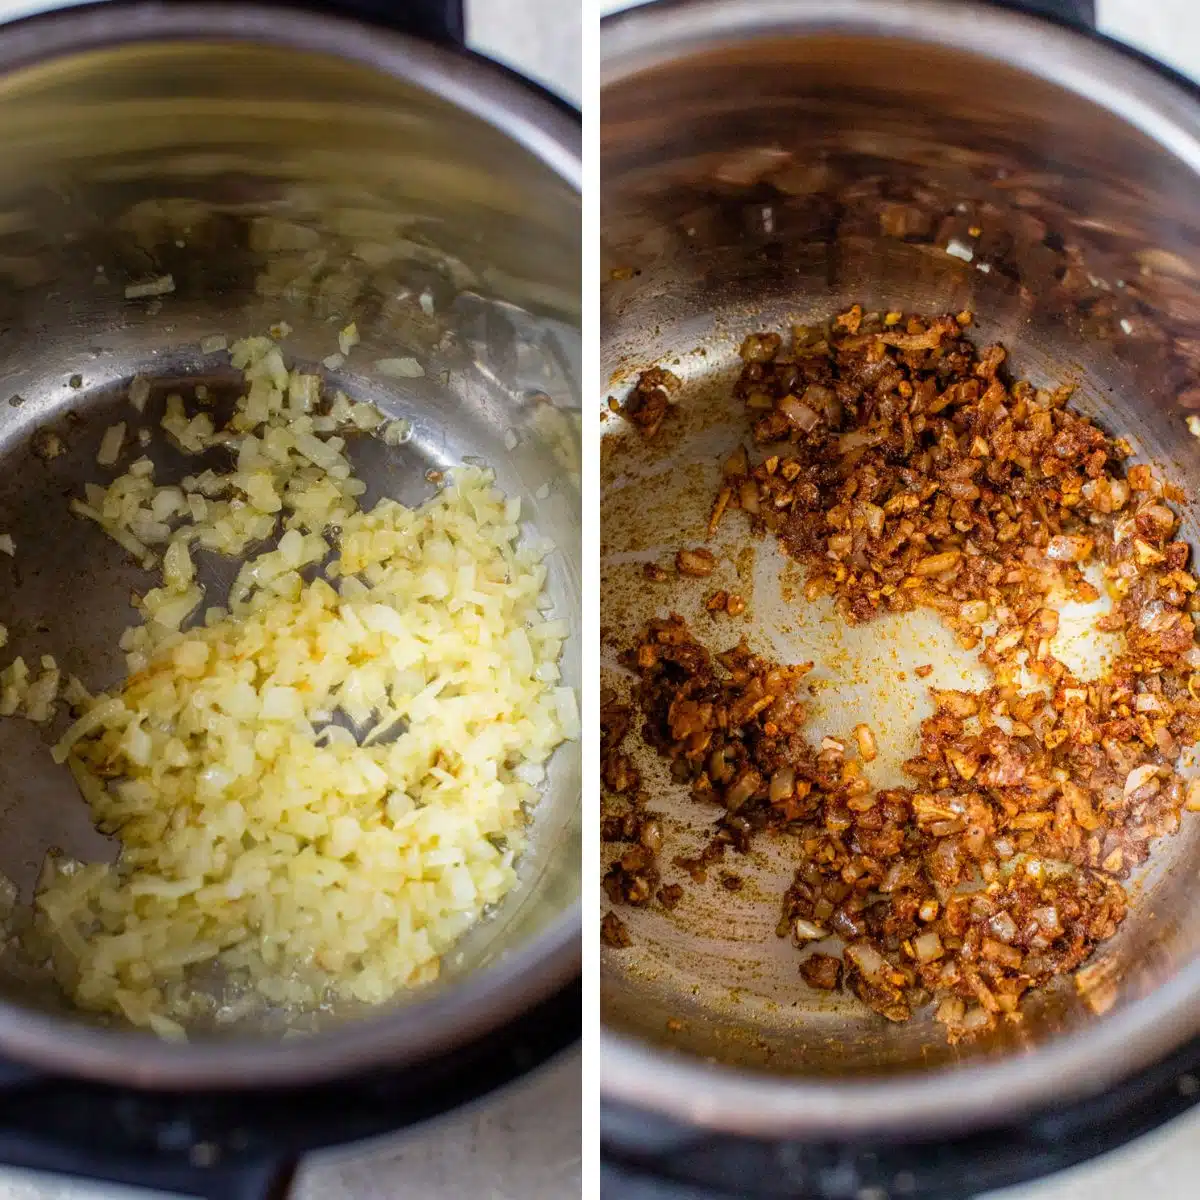 2 images: the left image shows onion cooking in an instant pot and the right image shows the onion with ginger and spices cooking in an instant pot